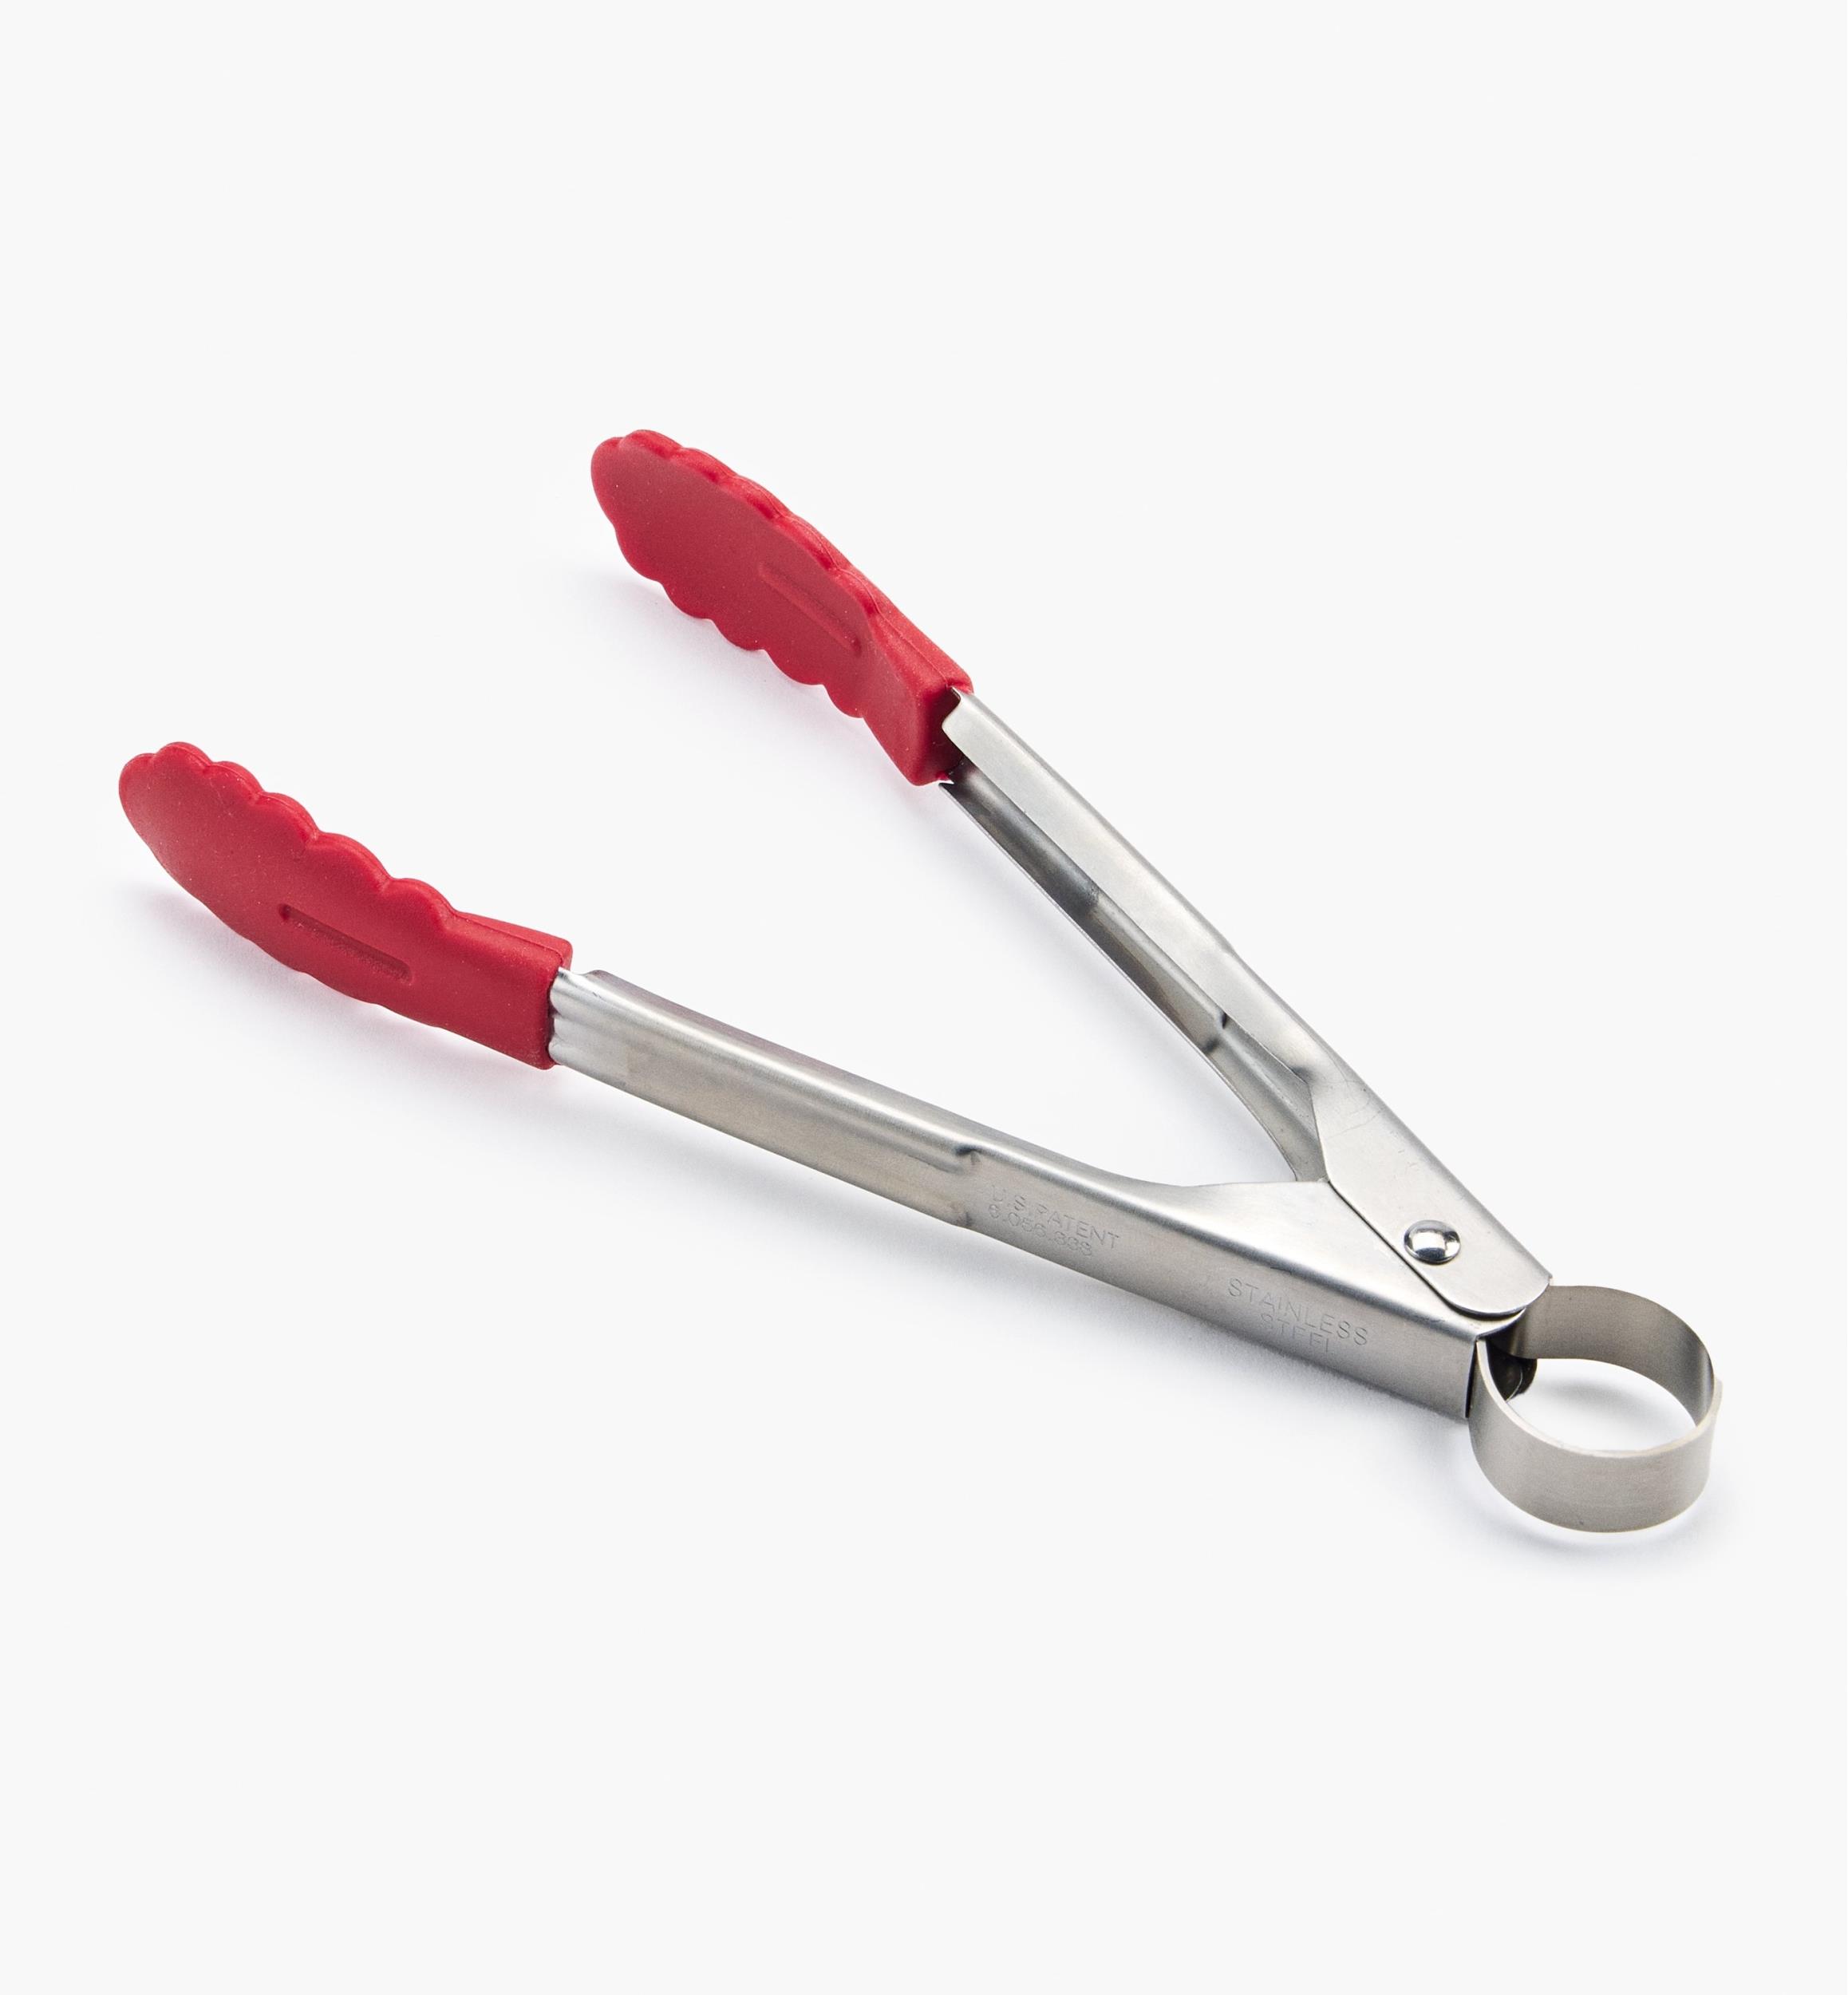 Locking Tongs 15.7 in. – Different Drummer's Kitchen, Inc.